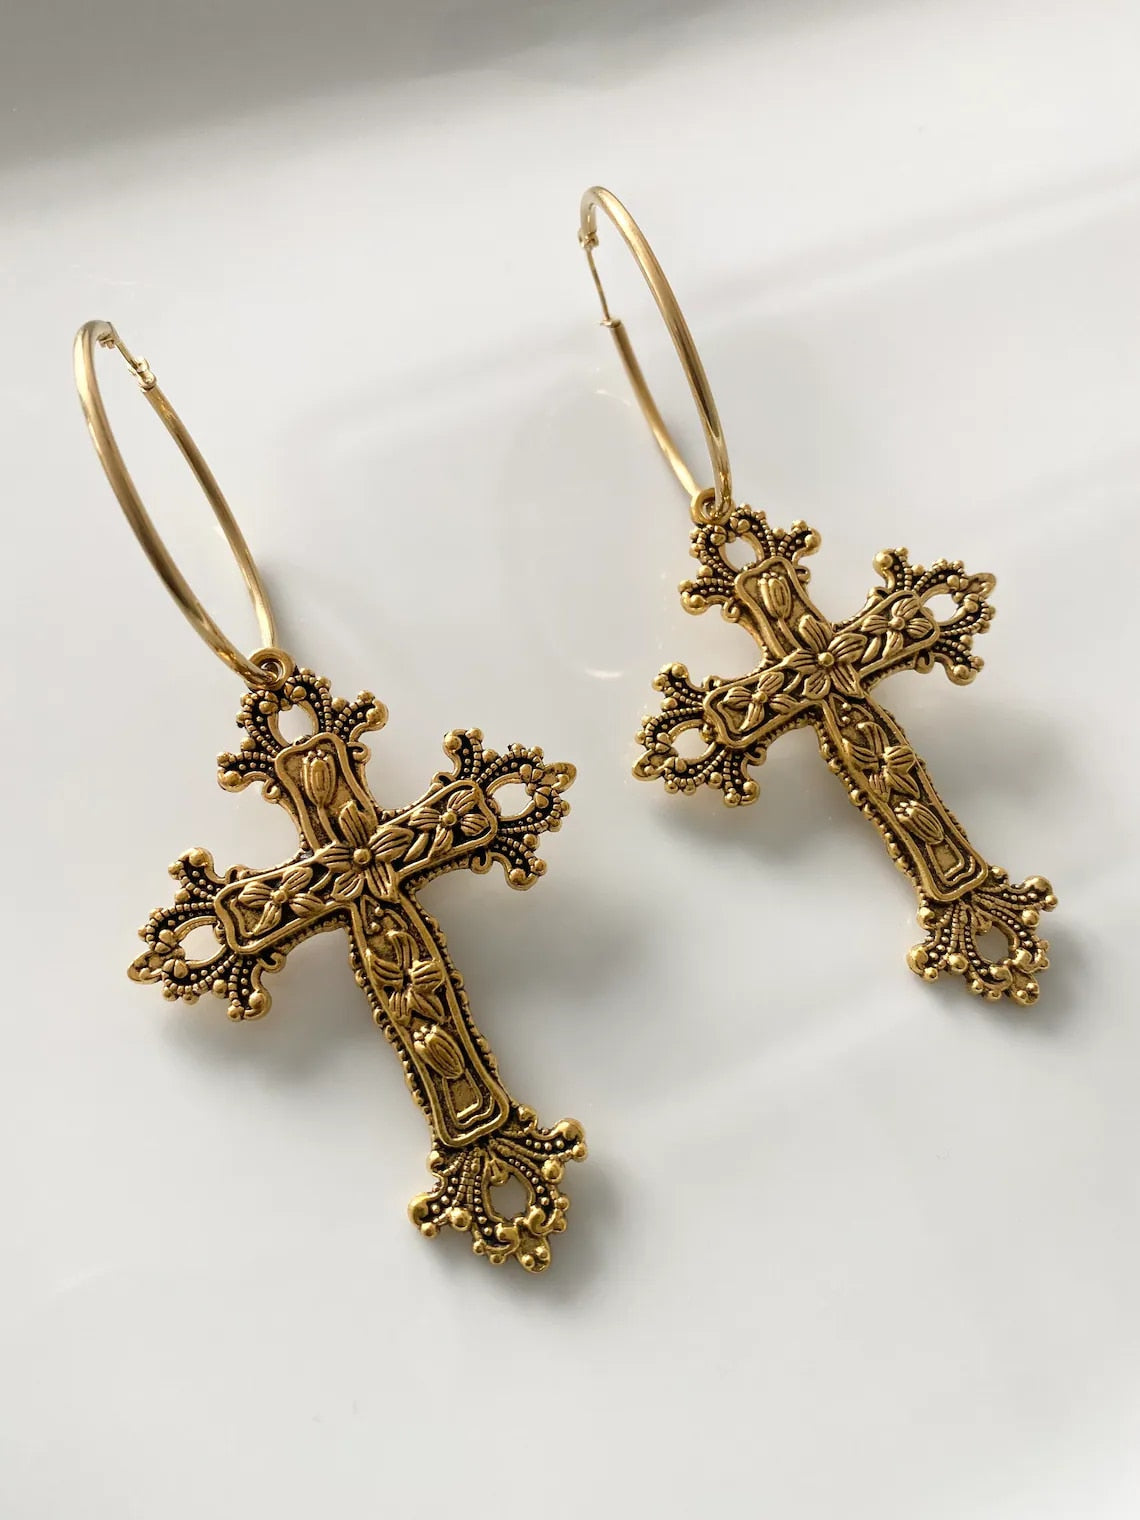 Timeless Protection Like a Prayer Antique Gothic Cross Hoops -